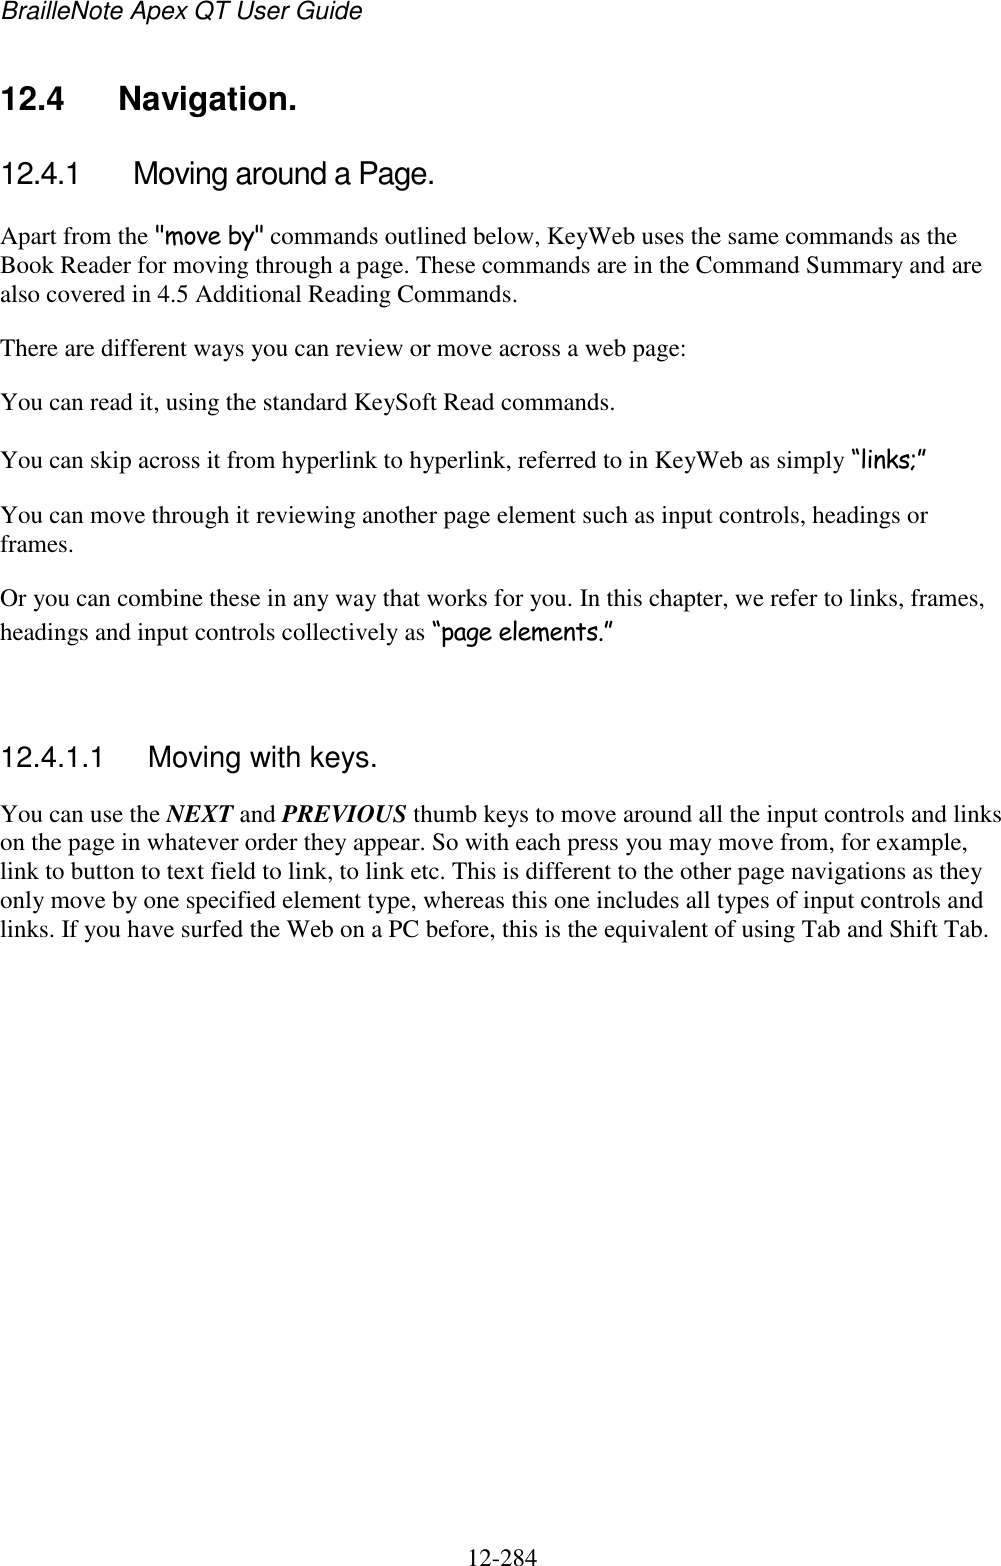 BrailleNote Apex QT User Guide  12-284   12.4  Navigation. 12.4.1  Moving around a Page. Apart from the &quot;move by&quot; commands outlined below, KeyWeb uses the same commands as the Book Reader for moving through a page. These commands are in the Command Summary and are also covered in 4.5 Additional Reading Commands. There are different ways you can review or move across a web page: You can read it, using the standard KeySoft Read commands. You can skip across it from hyperlink to hyperlink, referred to in KeyWeb as simply “links;” You can move through it reviewing another page element such as input controls, headings or frames. Or you can combine these in any way that works for you. In this chapter, we refer to links, frames, headings and input controls collectively as “page elements.”   12.4.1.1  Moving with keys. You can use the NEXT and PREVIOUS thumb keys to move around all the input controls and links on the page in whatever order they appear. So with each press you may move from, for example, link to button to text field to link, to link etc. This is different to the other page navigations as they only move by one specified element type, whereas this one includes all types of input controls and links. If you have surfed the Web on a PC before, this is the equivalent of using Tab and Shift Tab.   